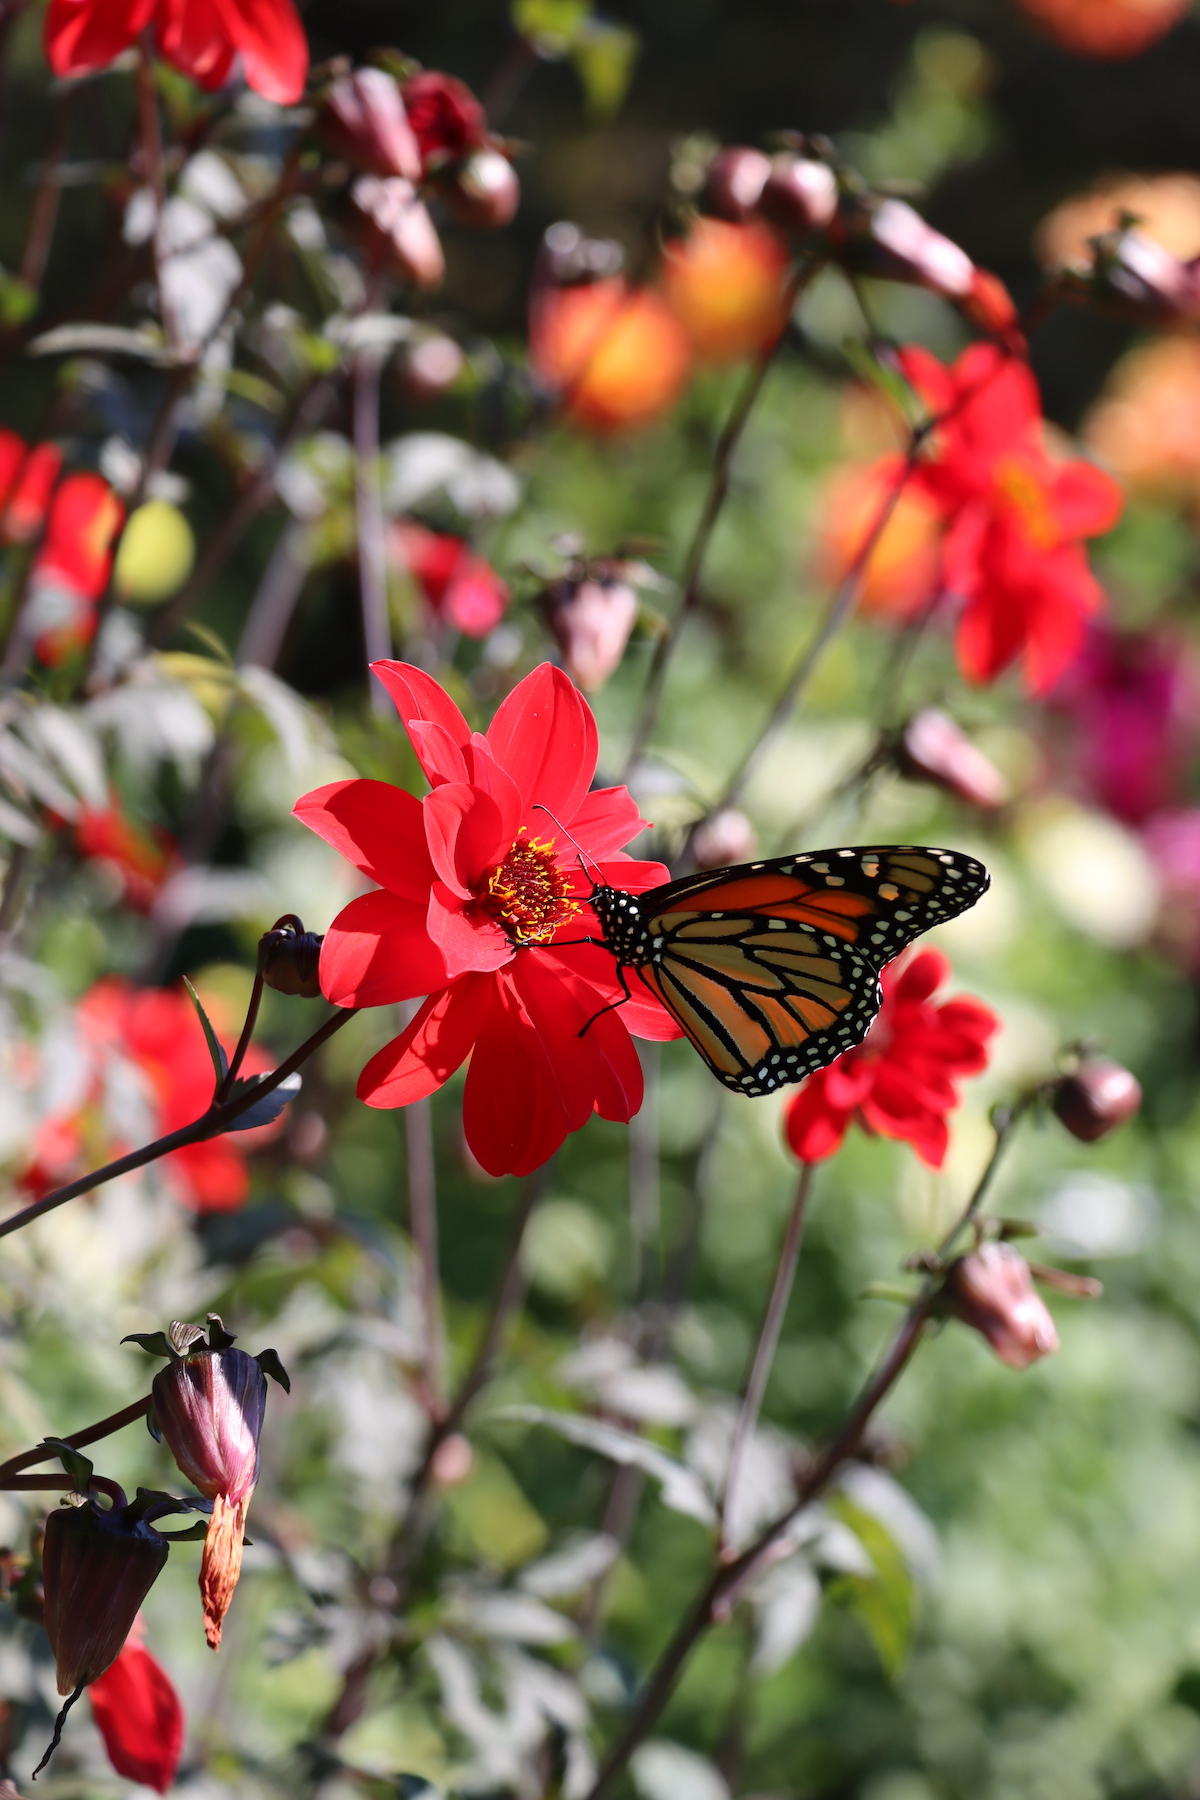 Monarch butterfly on red dahlia at Rotary Botanical Gardens in Janesville, Wisconsin